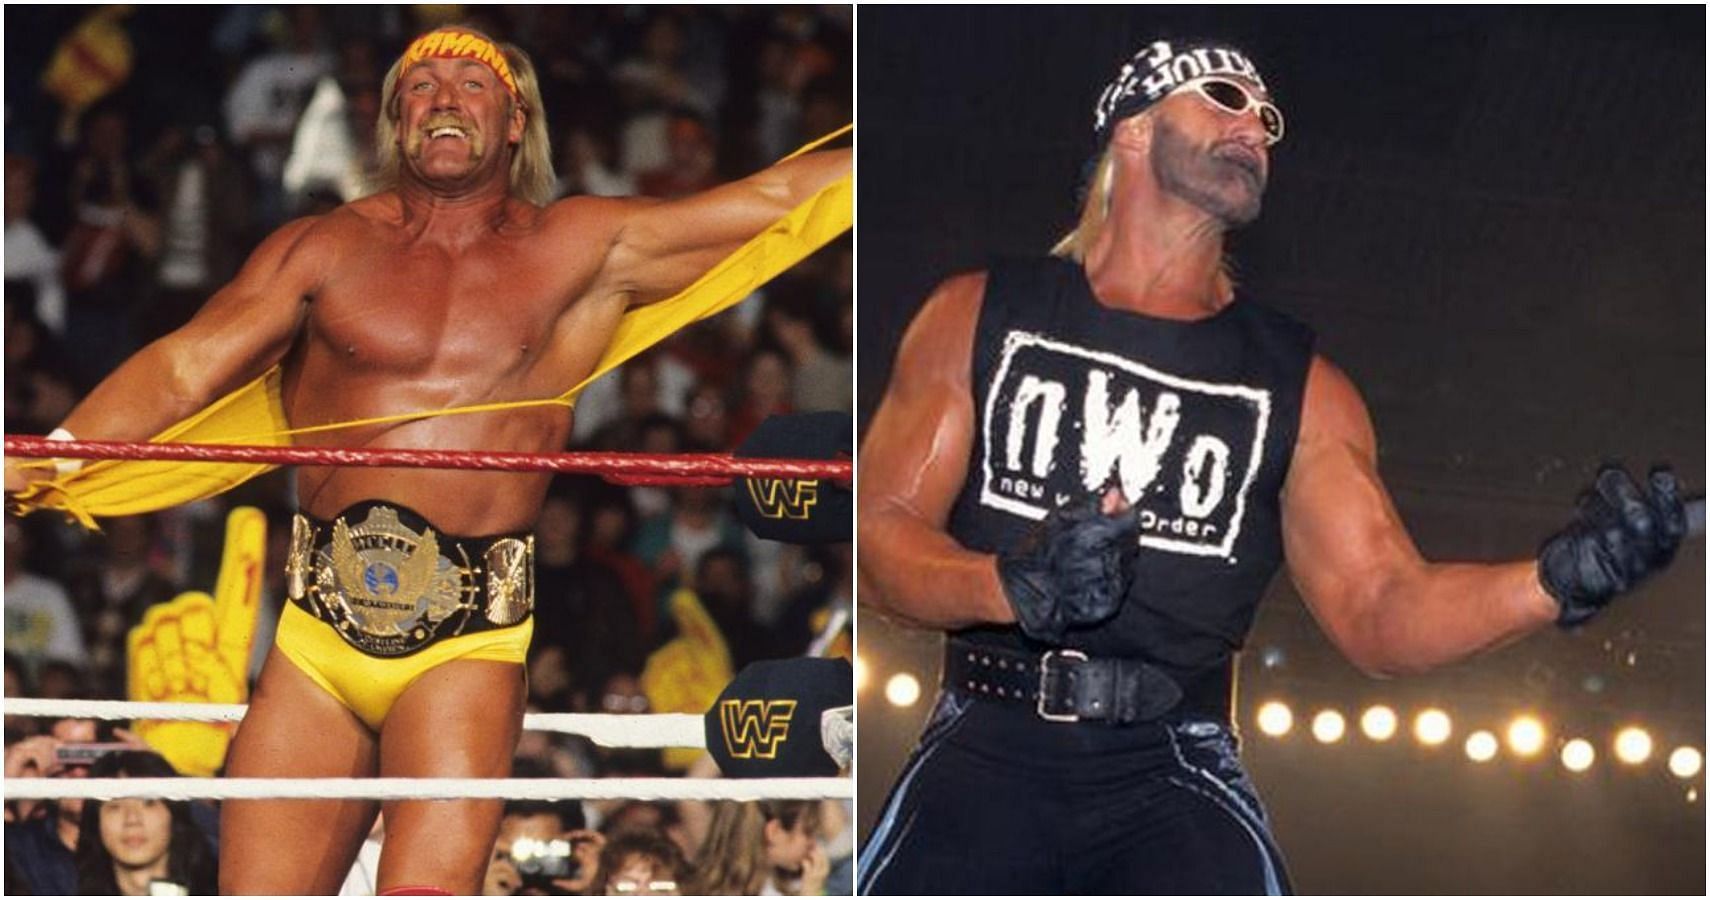 Hulk Hogan had some pretty embarassing matches in his career. Here is some of his most disappointing matches to date.